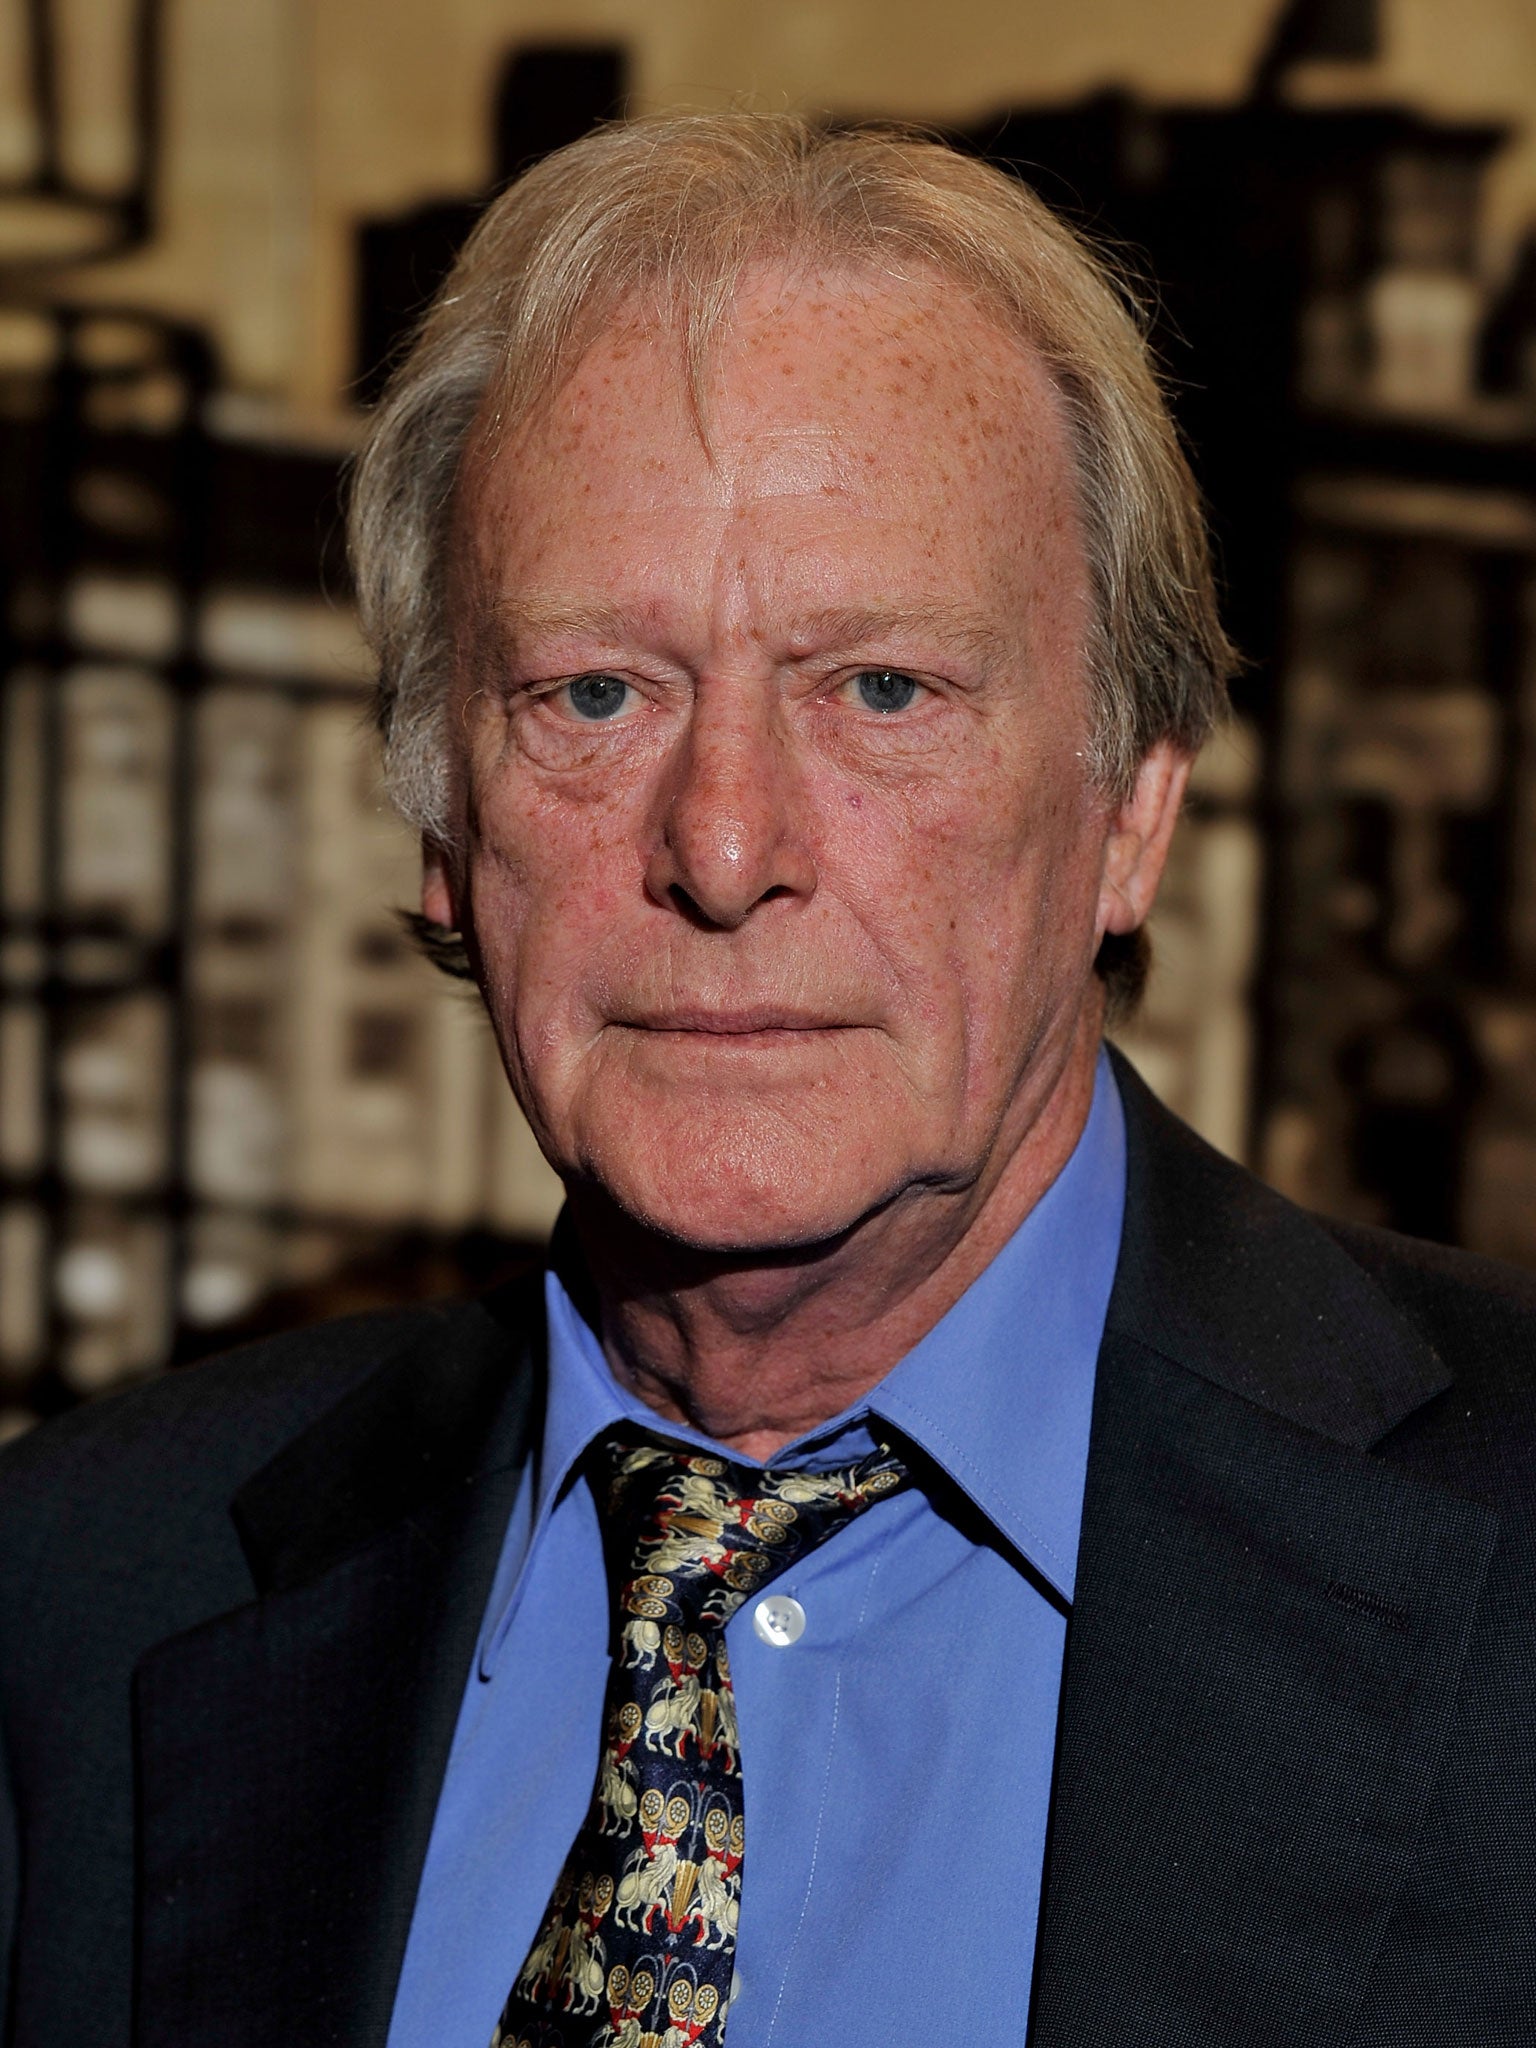 'New Tricks' star Dennis Waterman is departing from the show after he completes filming on two more episodes